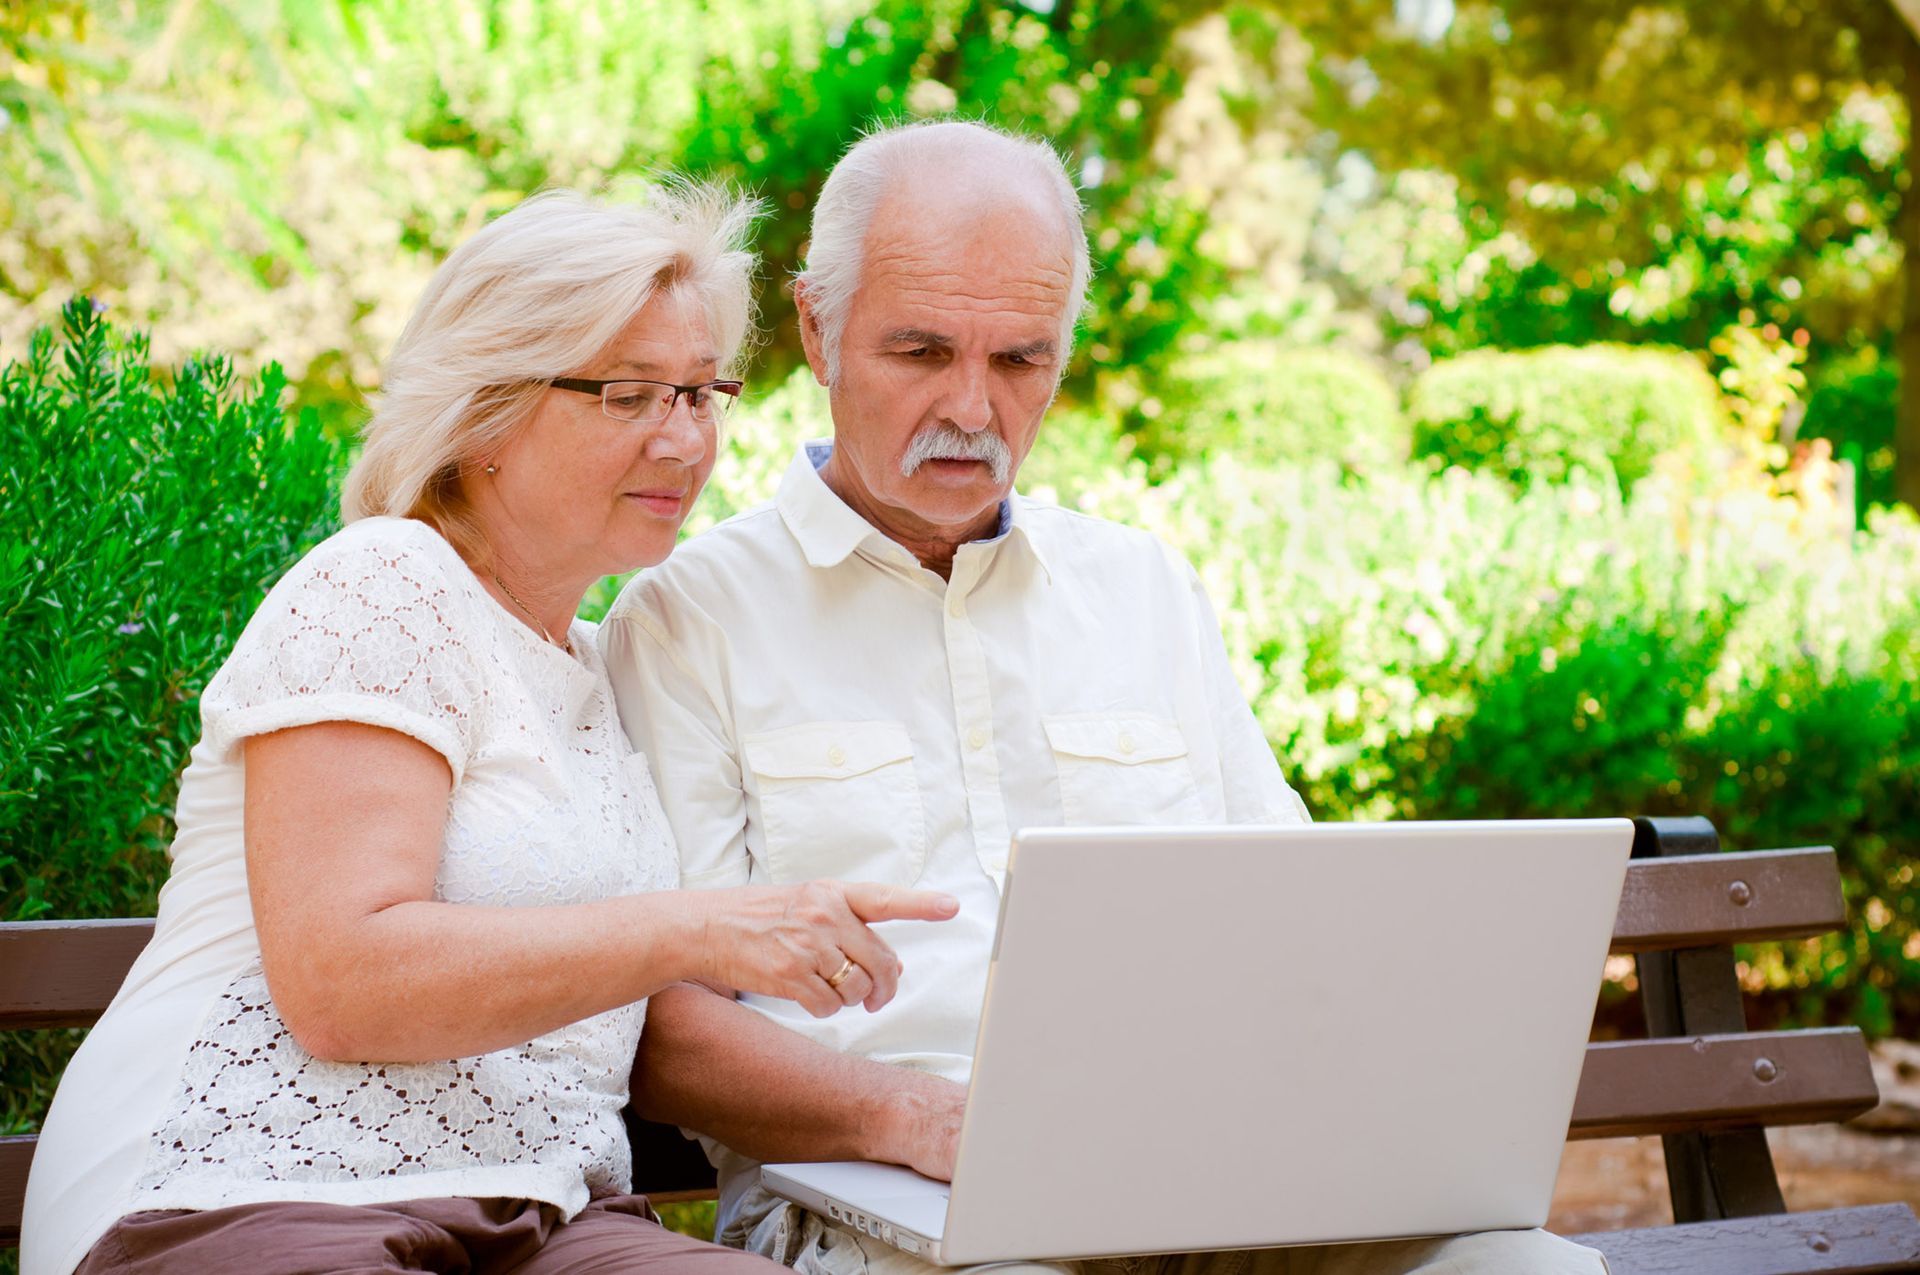 an elderly couple is sitting on a bench looking at a laptop computer